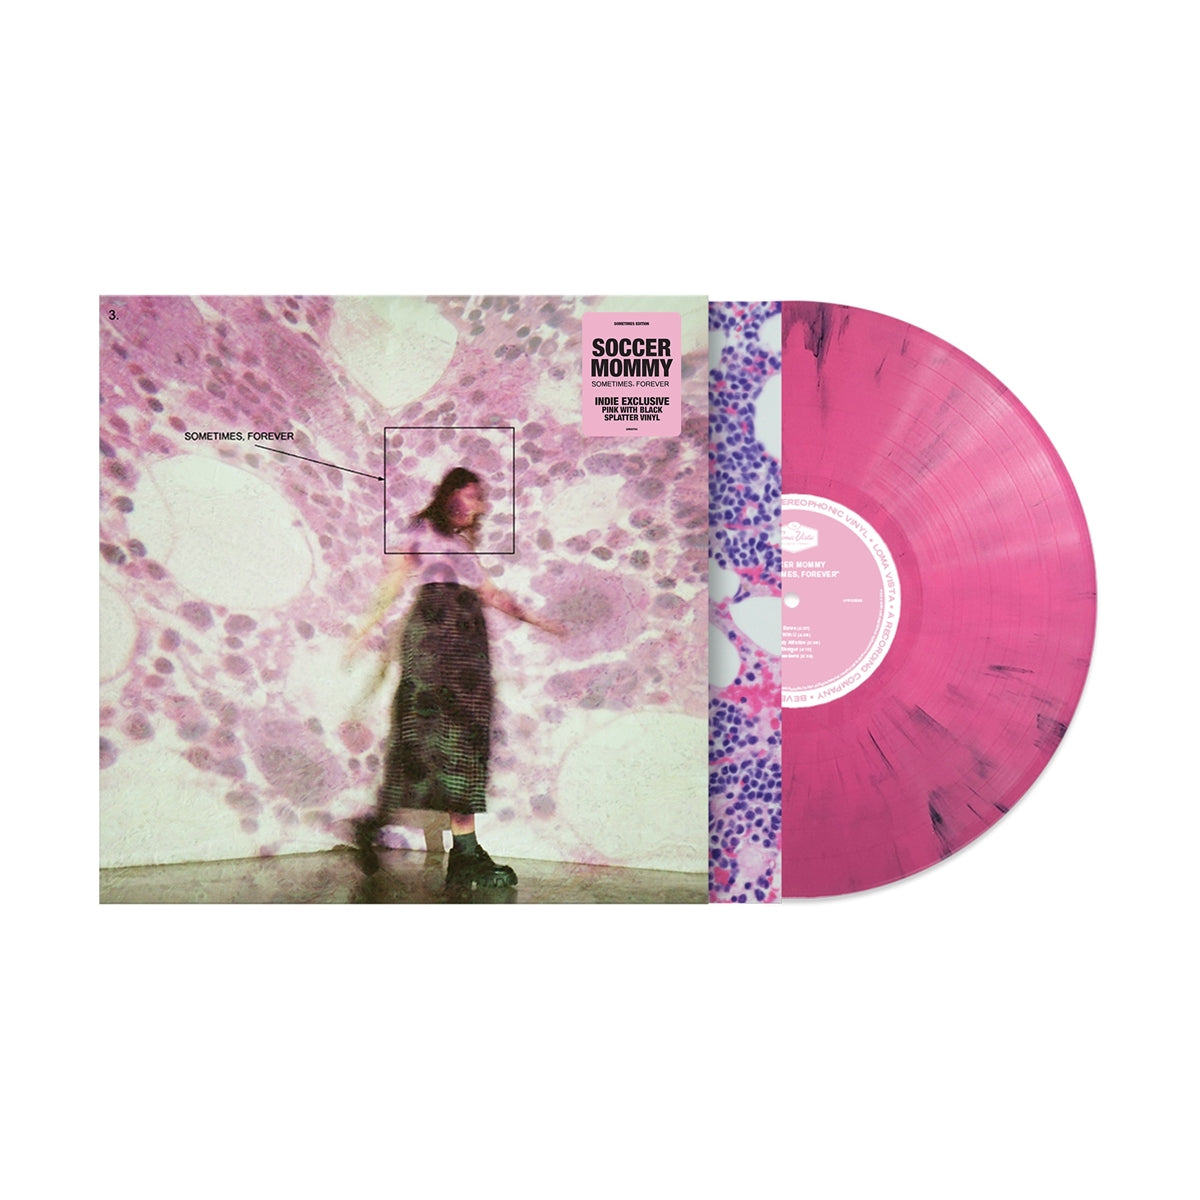 Sometimes, Forever (Colored Vinyl, Pink, Black, Limited Edition, Indie Exclusive)